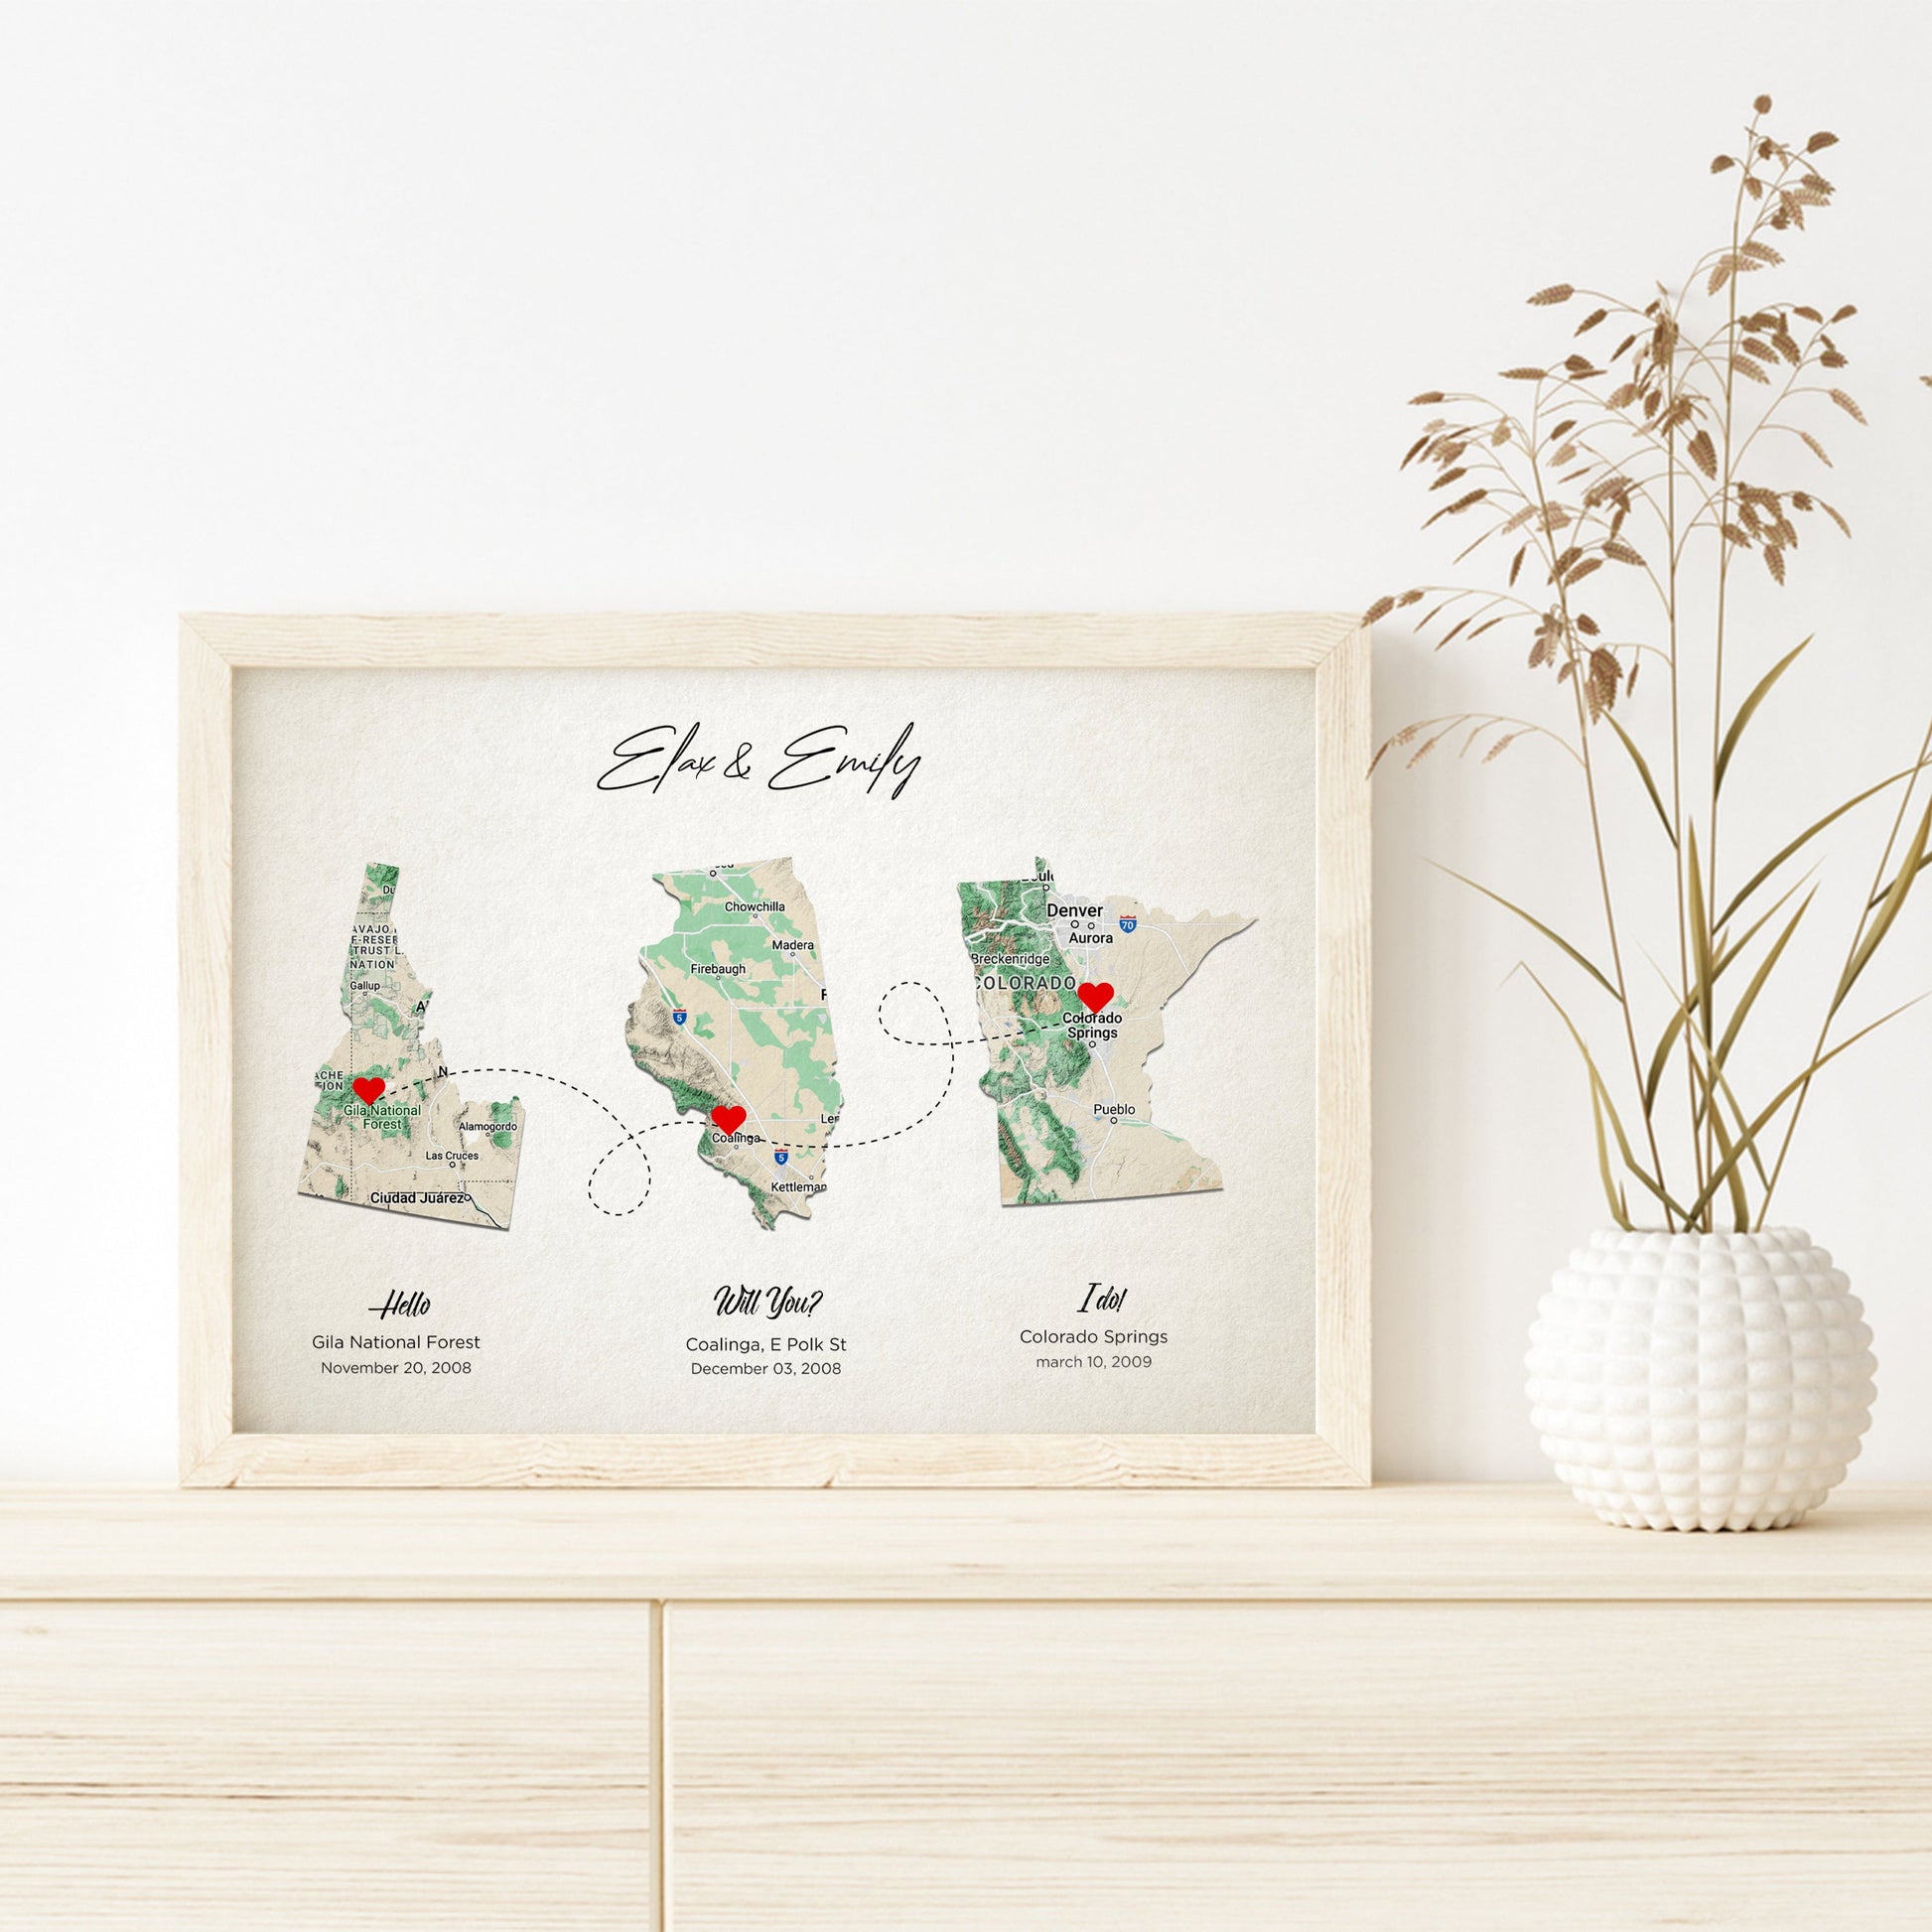 Colorful abstract map print in sleek frame, a one-of-a-kind gift.